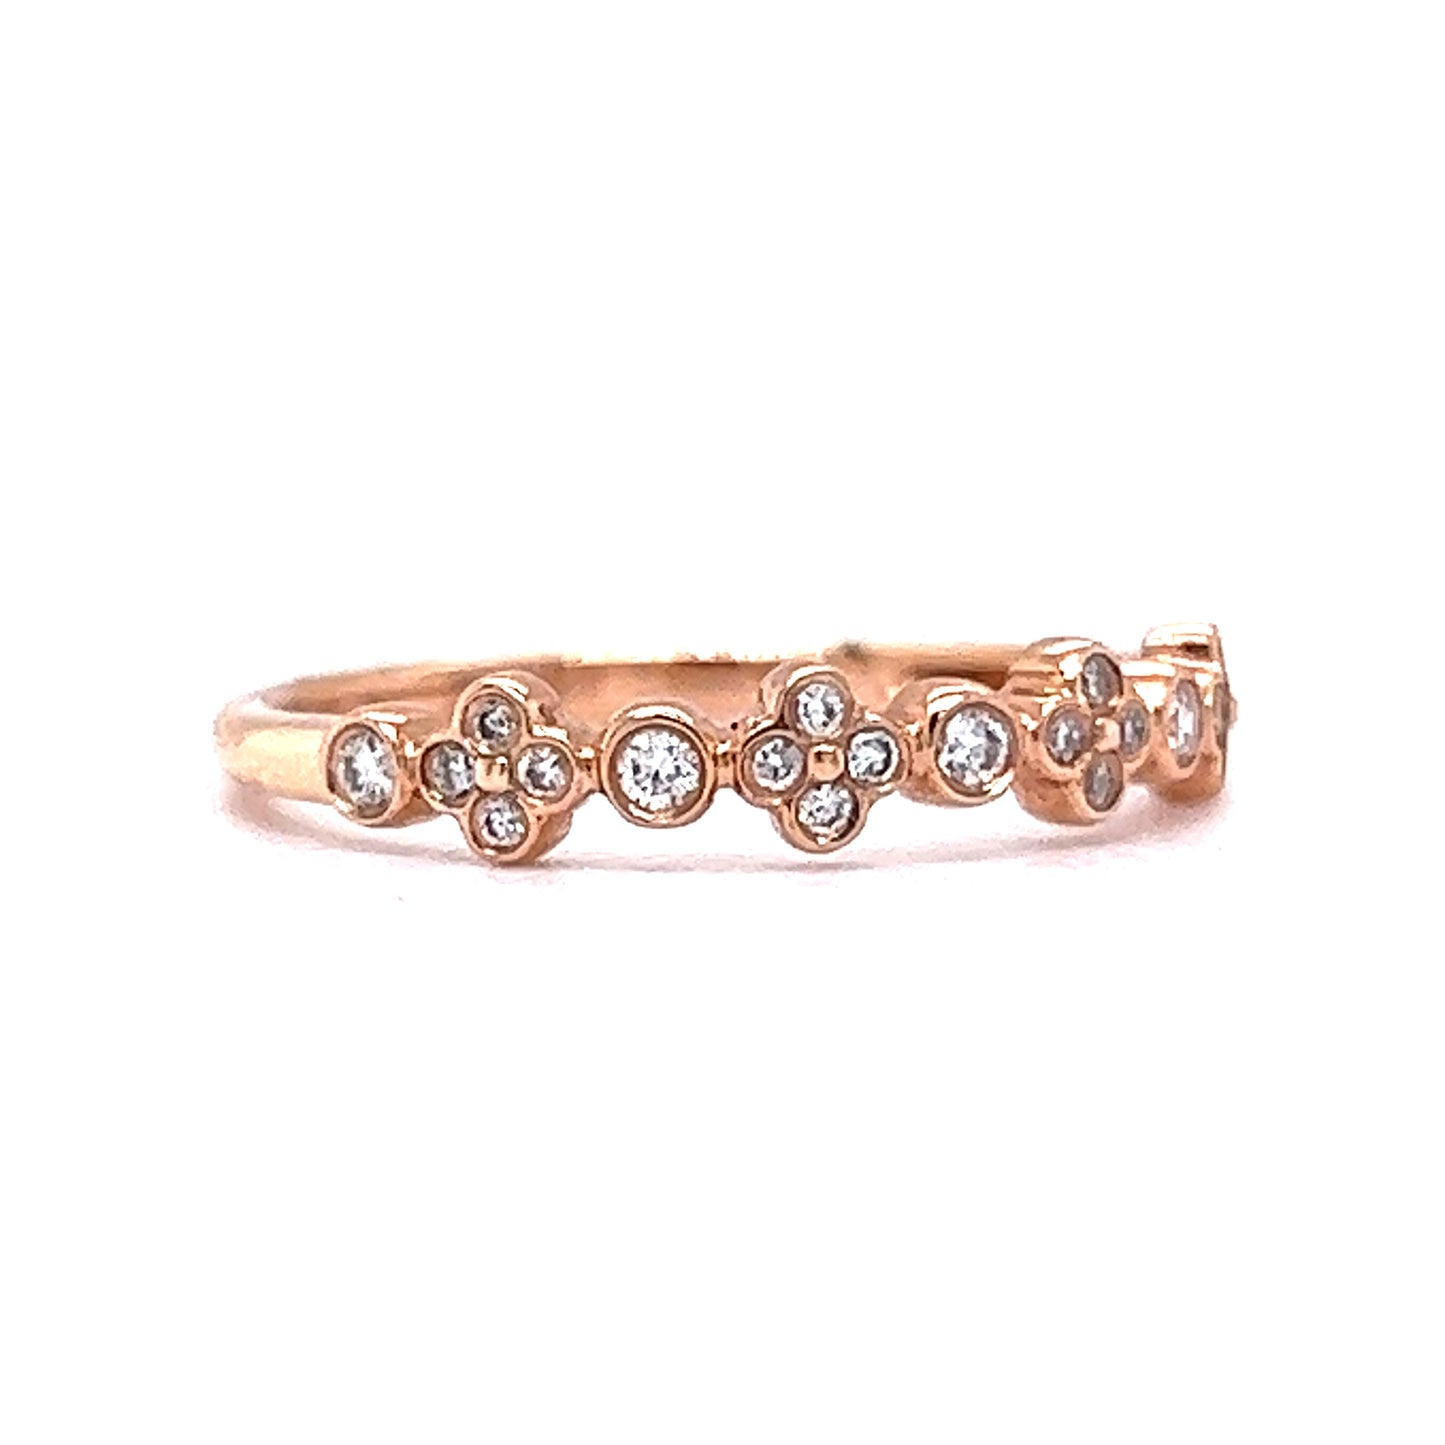 Wedding Band w/ .16 Carats of Diamonds in 14k Rose Gold